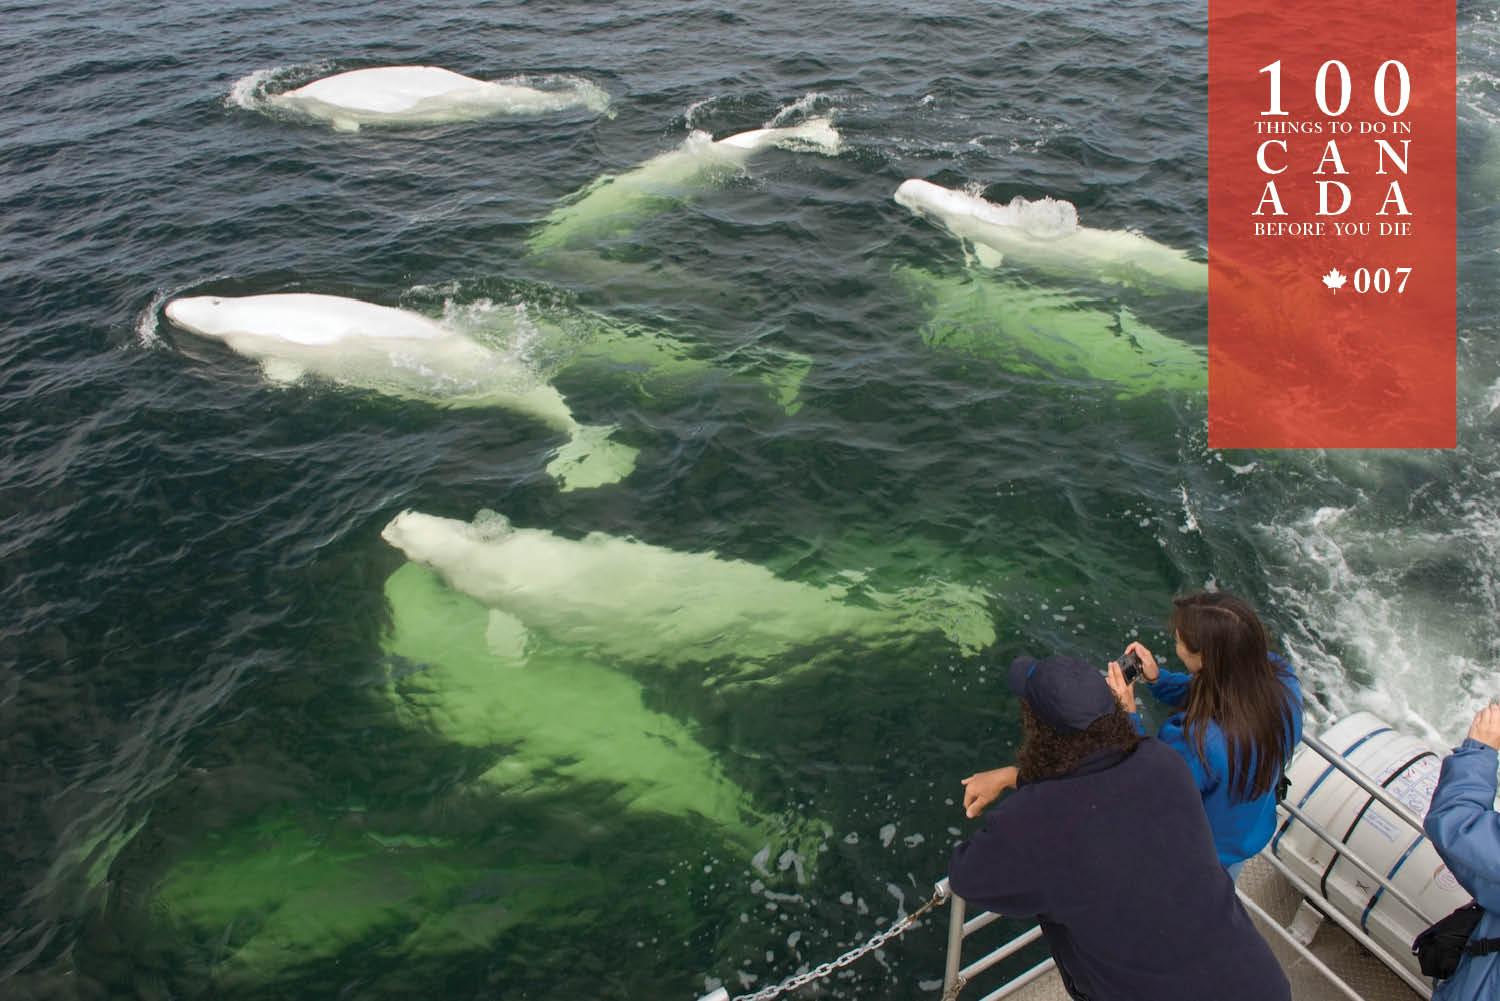 Snorkel with Canada's mystical beluga whales